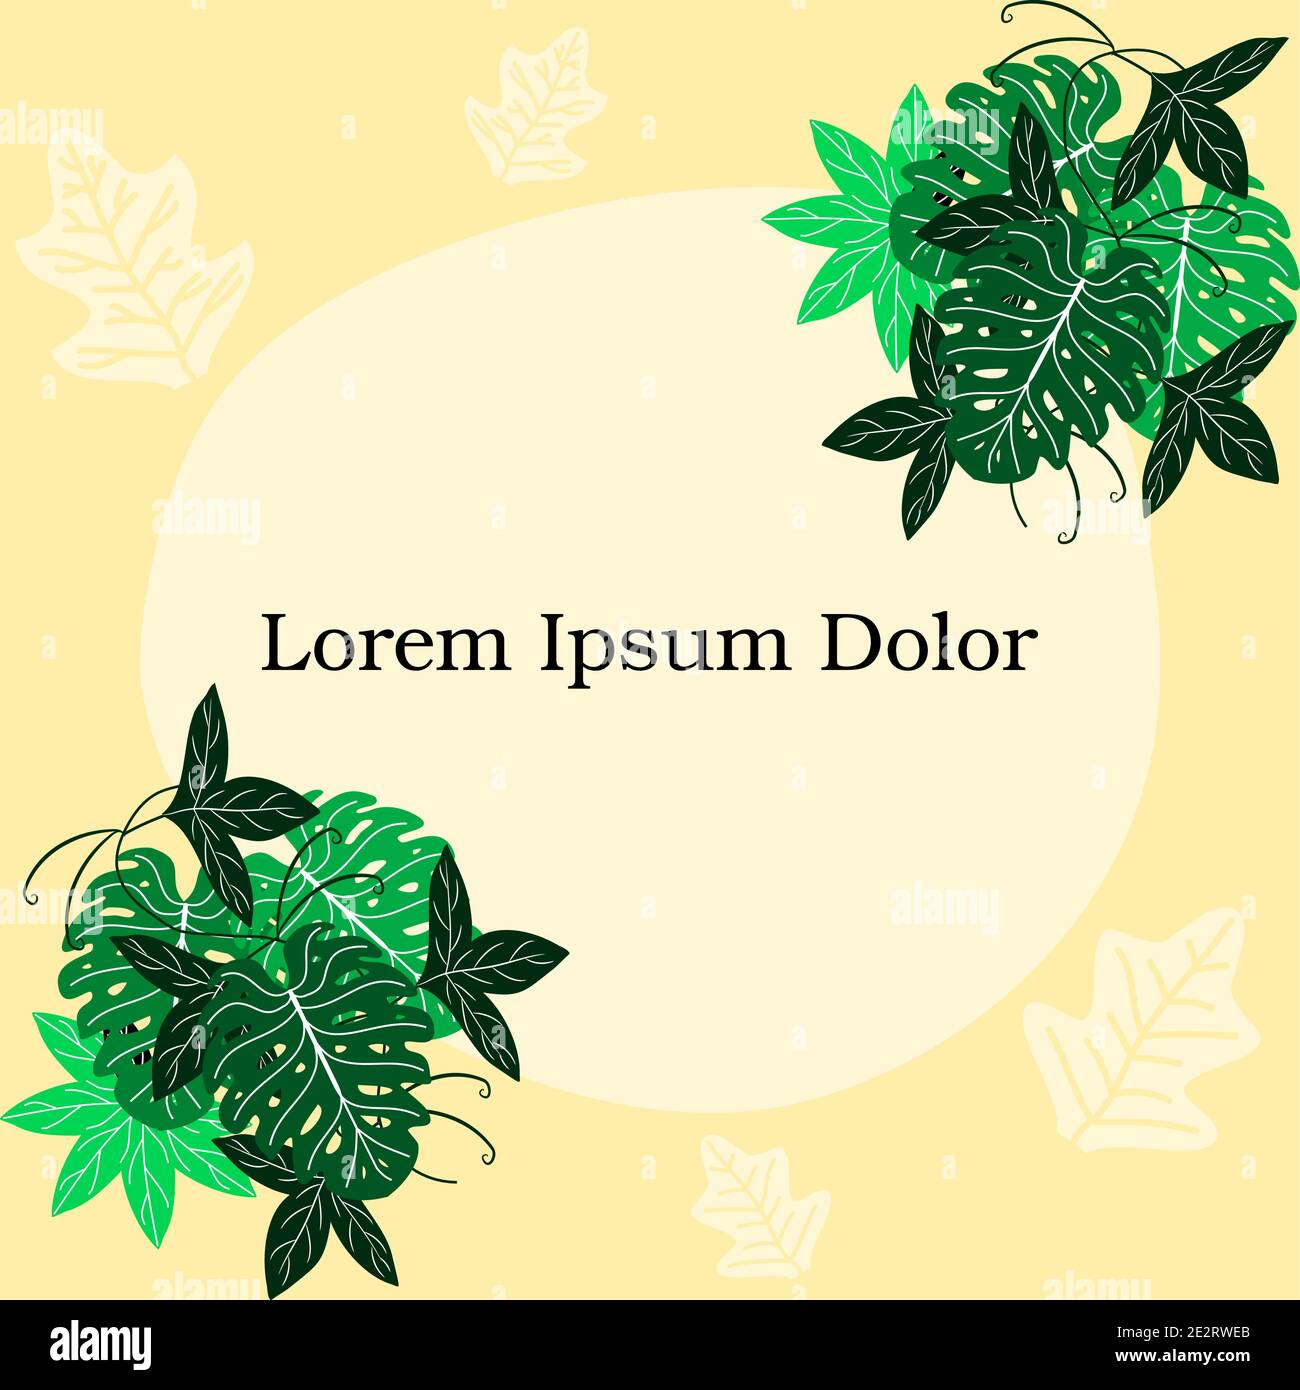 Post template in botanical theme Stock Vector